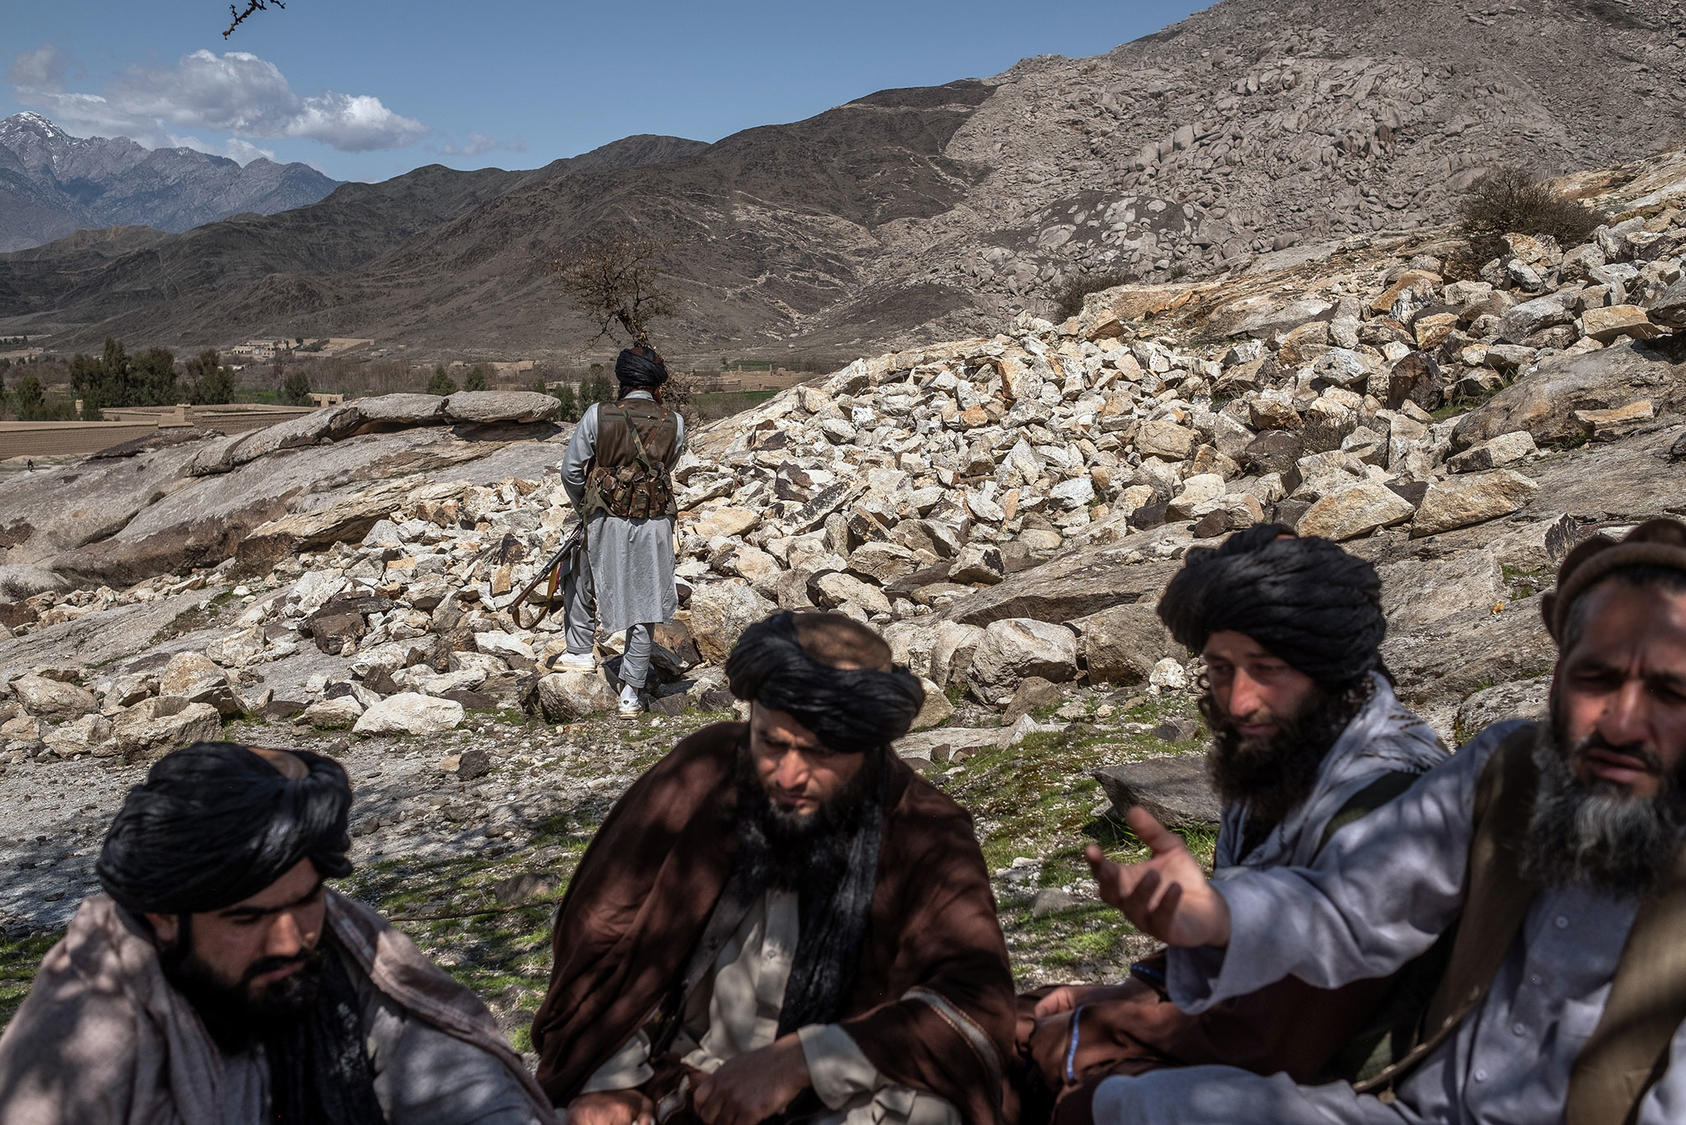 Members of the Taliban on Mach 13, 2020, in Laghman Province, Afghanistan. The group has threatened to resume attacks against coalition forces if the United States keeps troops in the country beyond May 1. (Jim Huylebroek/The New York Times)